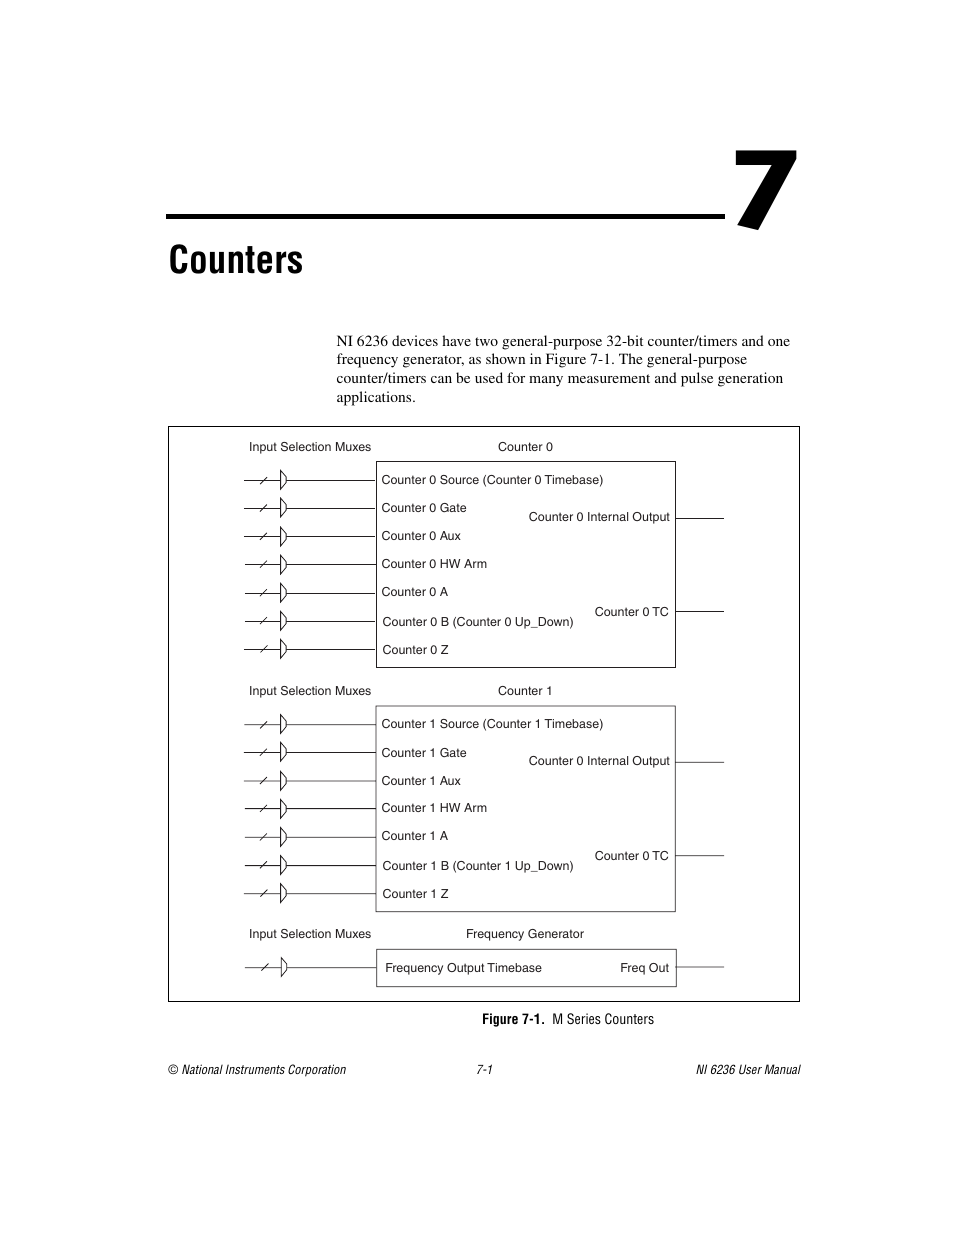 Chapter 7 counters, Figure 7-1. m series counters, Counters | National Instruments DAQ M Series User Manual | Page 63 / 162